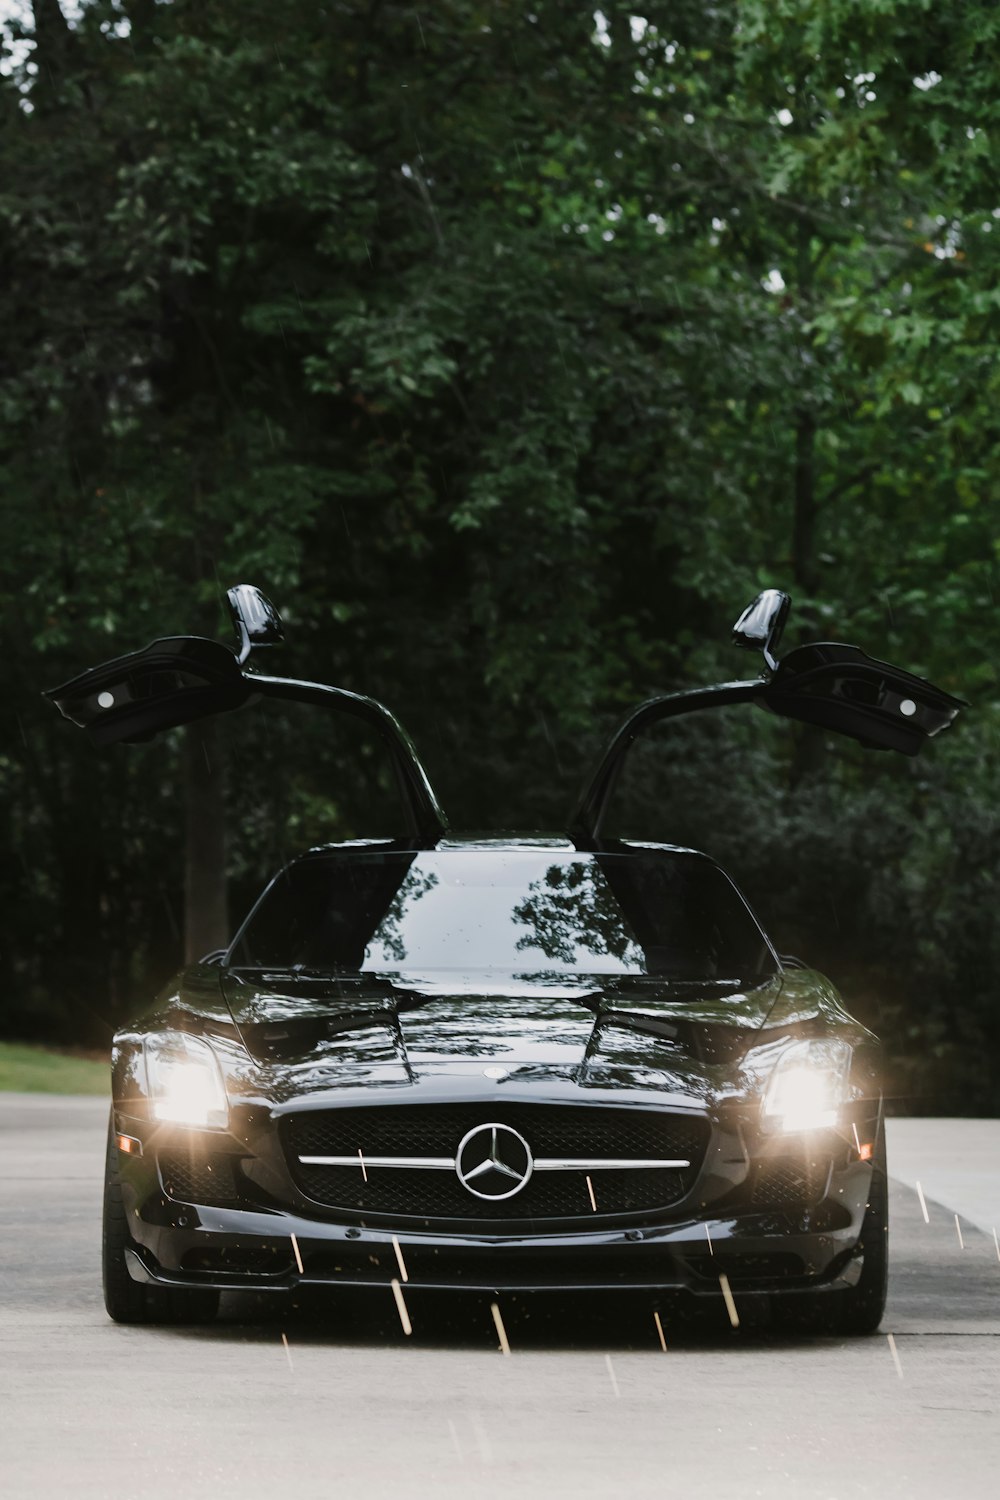 open door and turned-on headlights of black Mercedes-Benz coupe